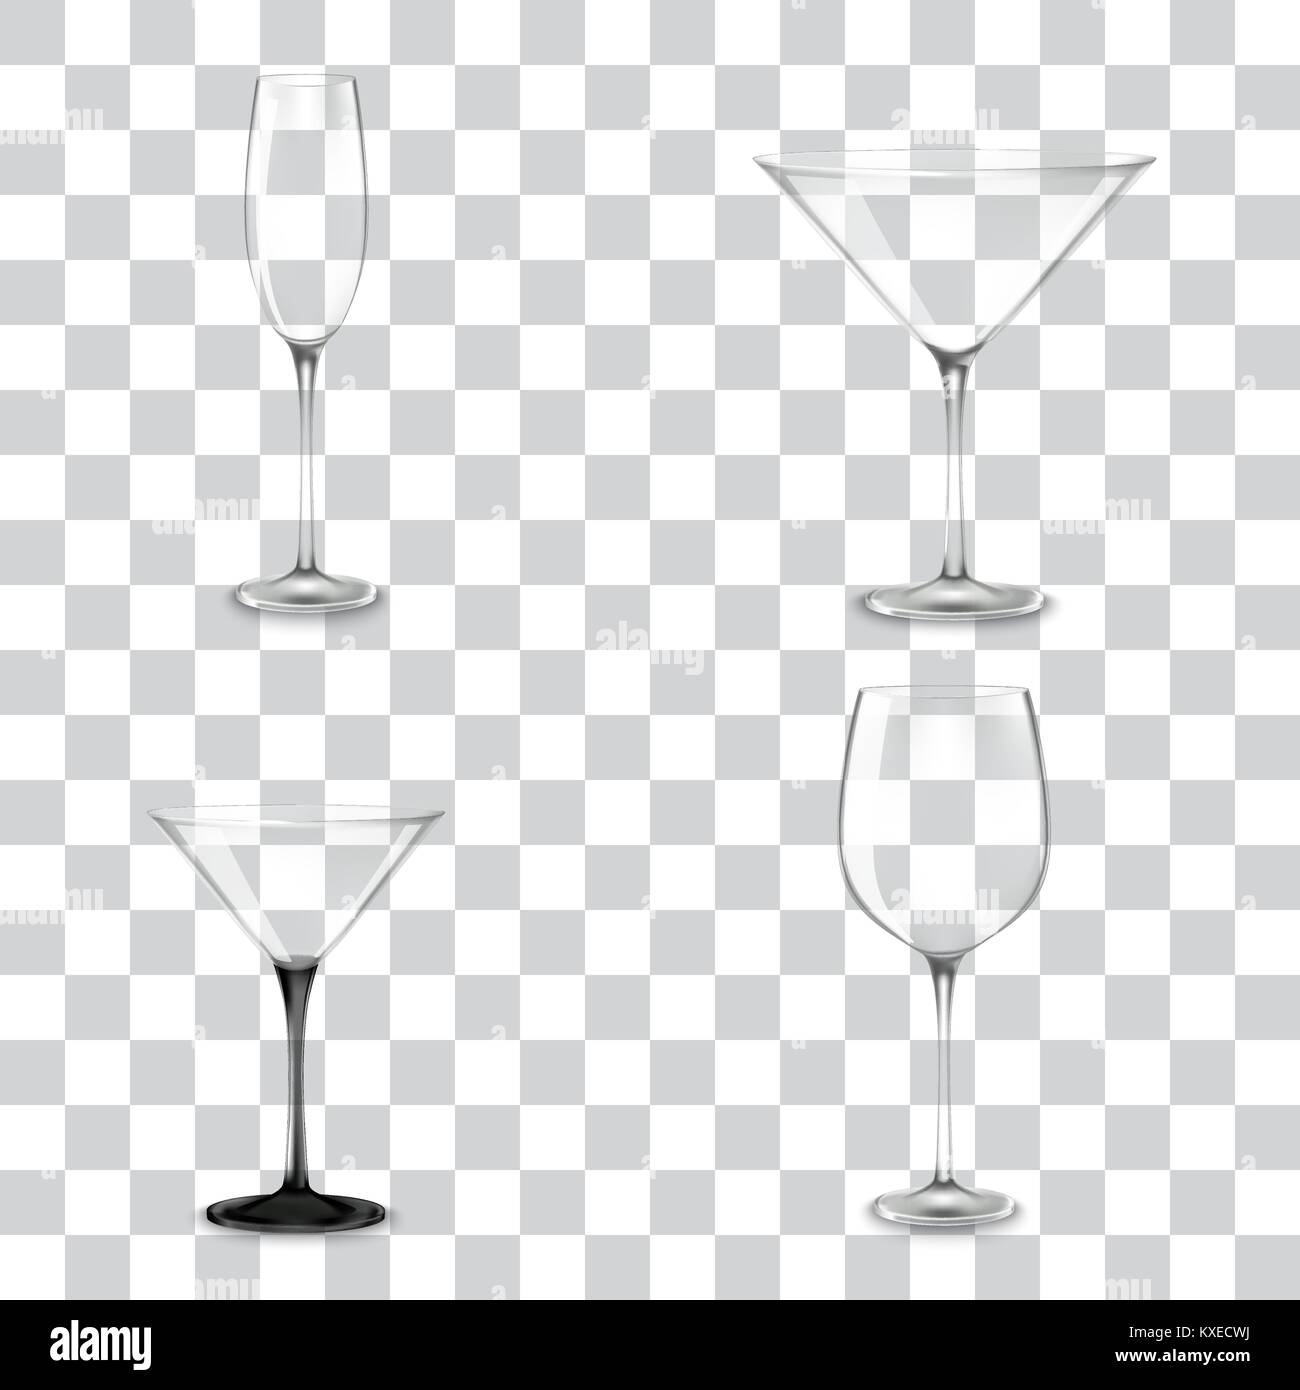 Set of cocktail glasses for alcohol Stock Vector